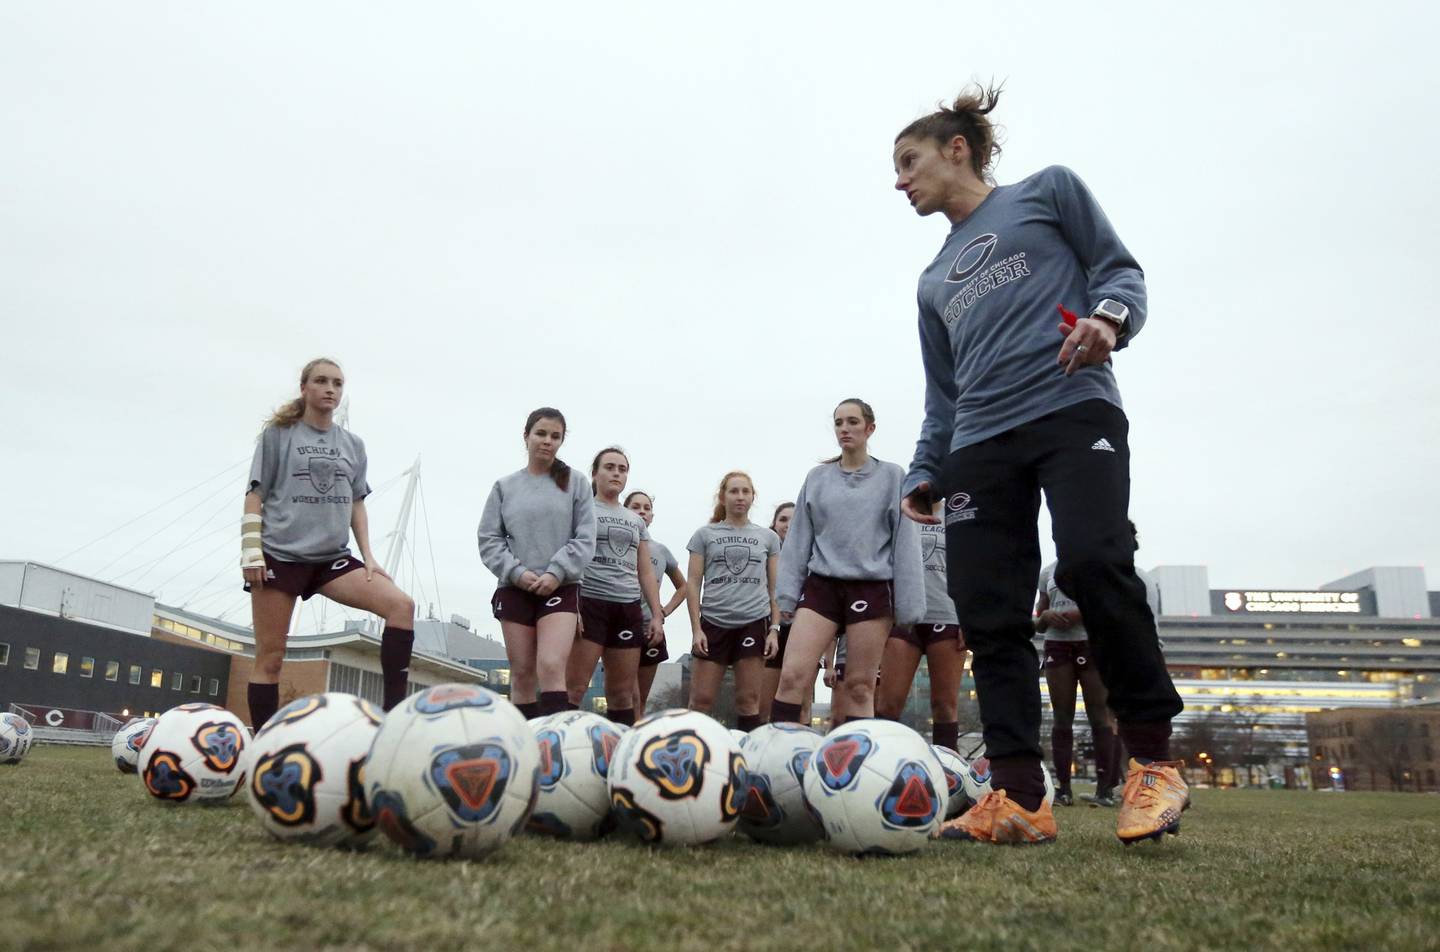 Julianne Sitch, an Oswego native works with the University of Chicago's women's soccer team during a pracitice in Chicago on Tuesday, Nov. 28, 2017.